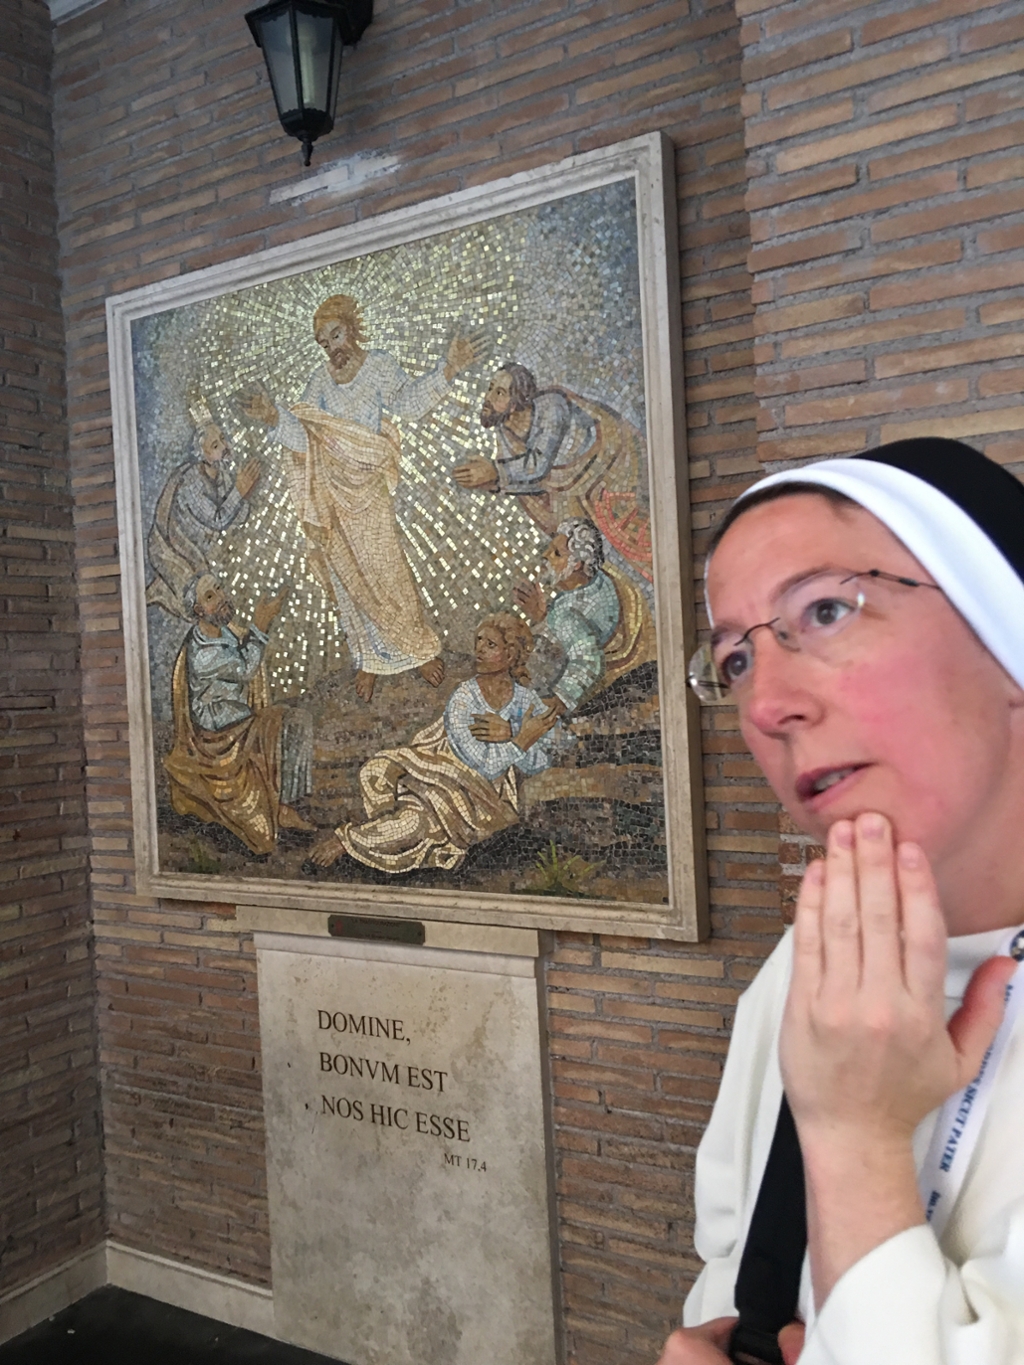 Sr. Rose Miriam from Ireland looking at art outside of St. Peter's.